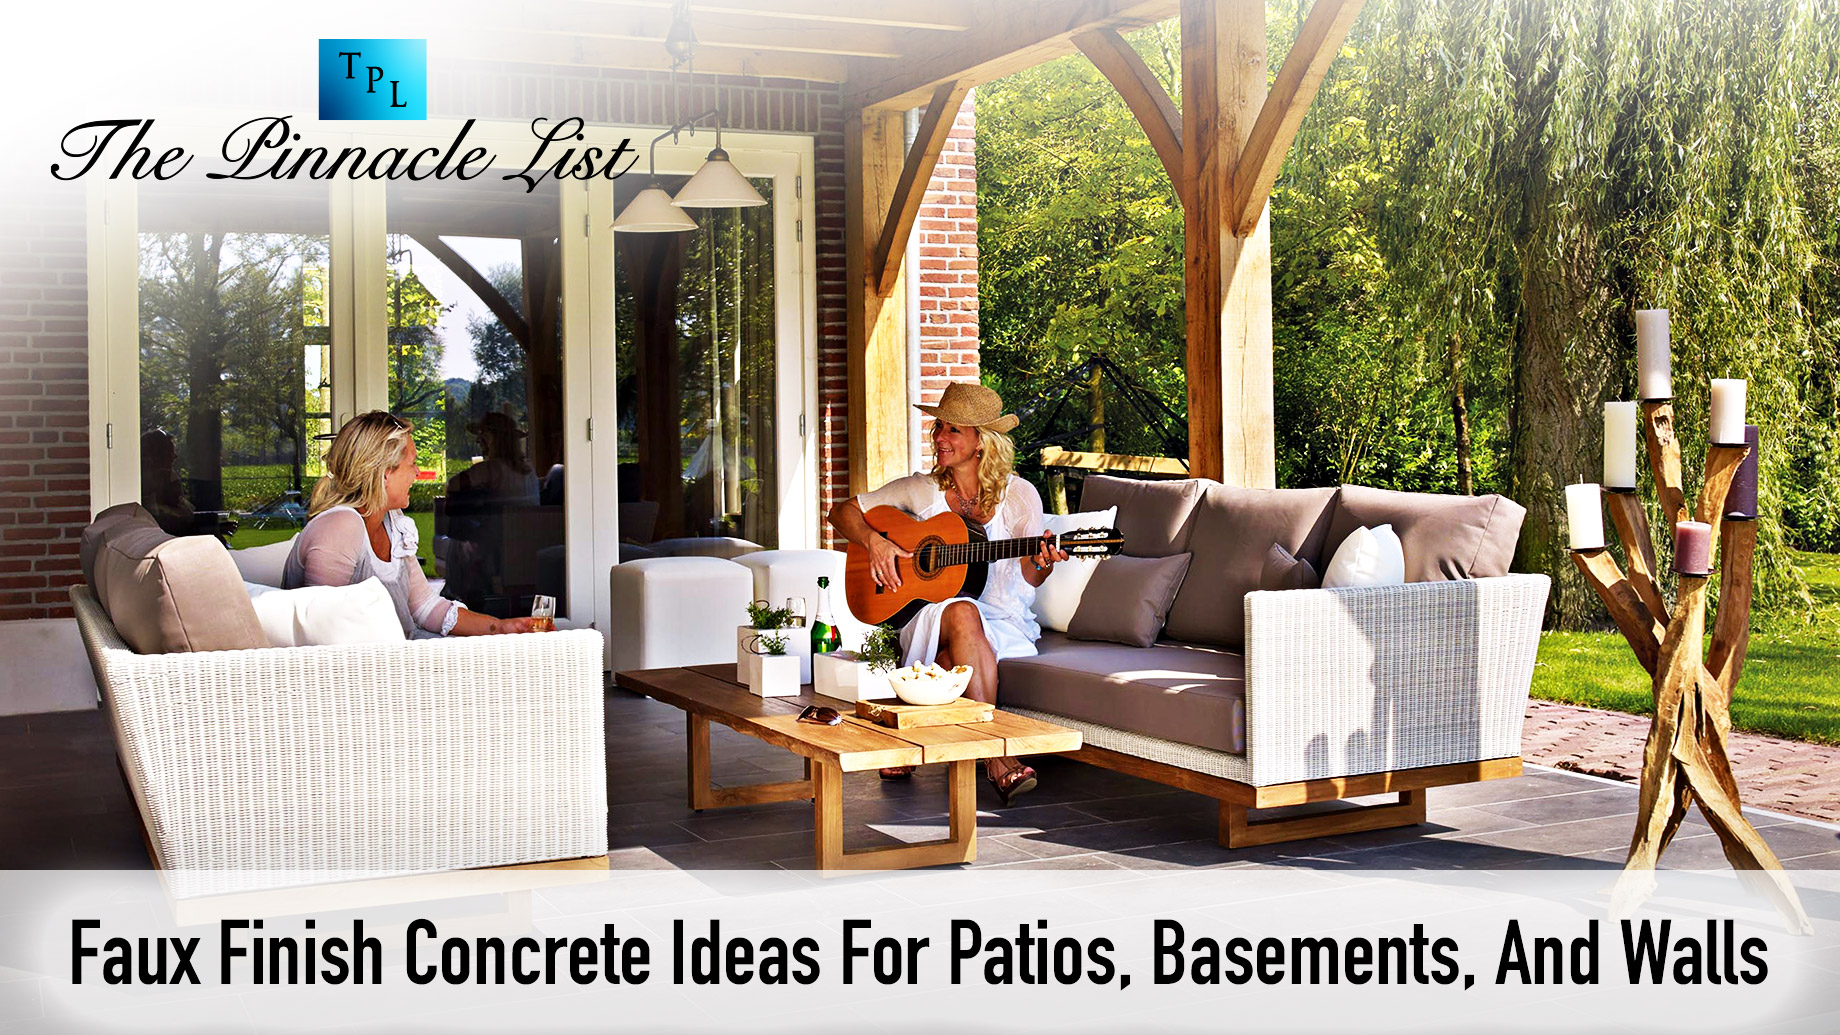 Faux Finish Concrete Ideas For Patios, Basements, And Walls